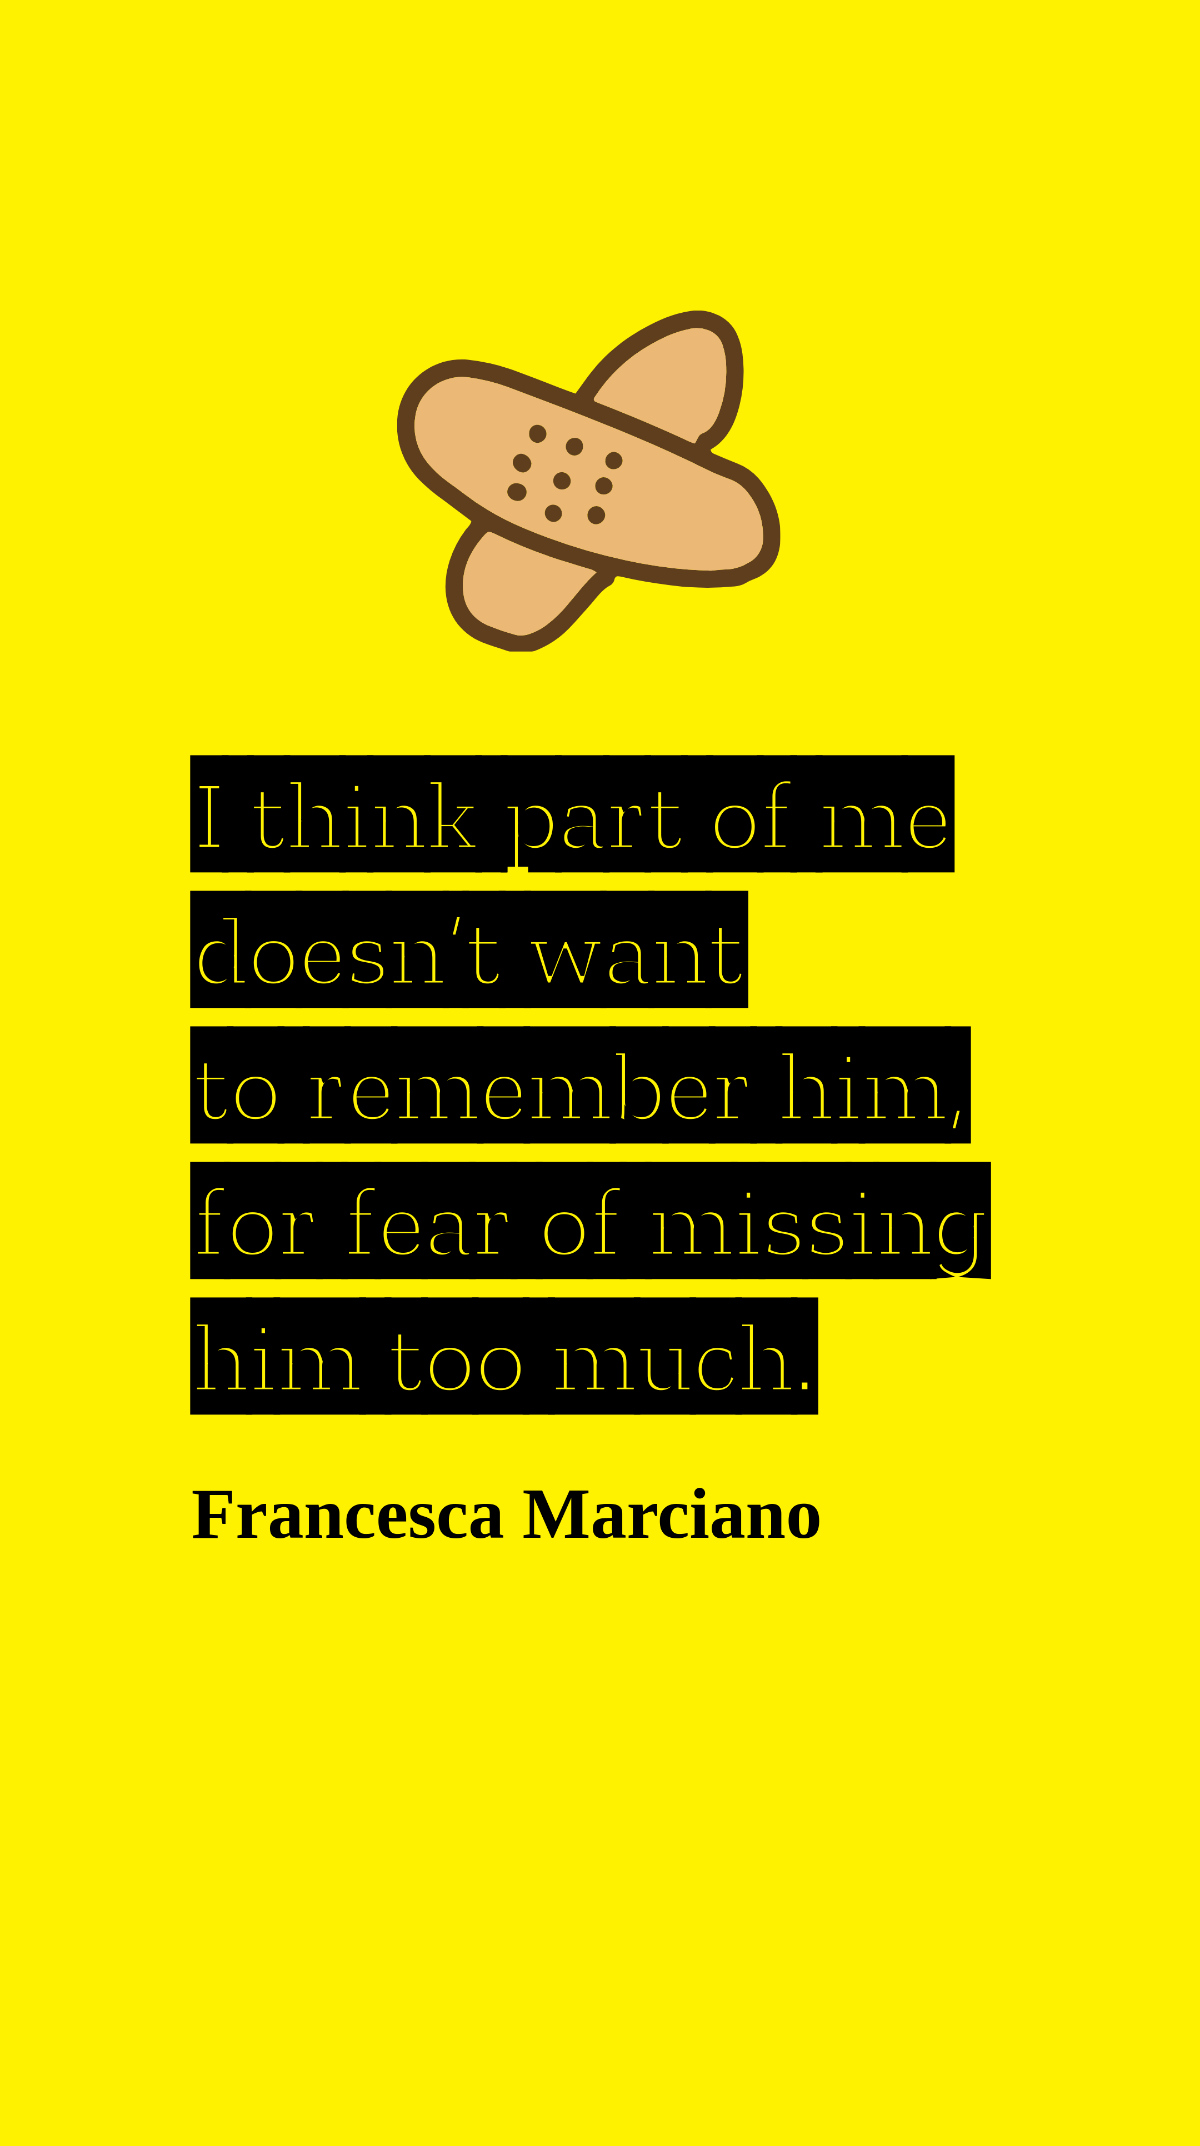 Francesca Marciano - I think part of me doesn’t want to remember him, for fear of missing him too much.